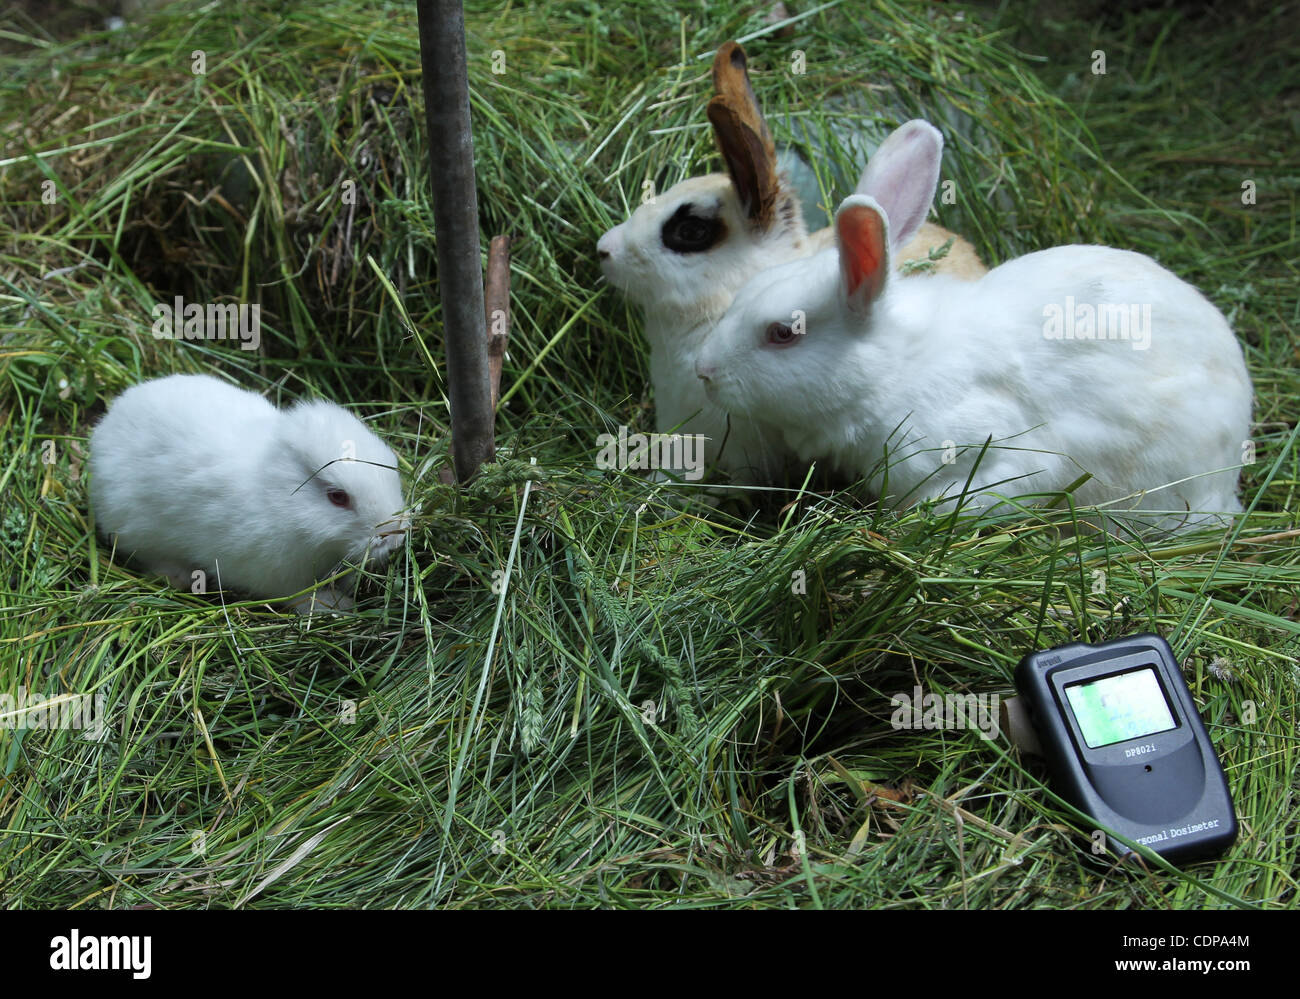 June 4, 2011 - Fukushima, Japan - A new-born rabbit without ears is seen in Namie City which is located just outside the 30km exclusion zone of the Fukushima Daiichi nuclear power station in Fukushima Prefecture, Japan. The owner of the rabbit Yuko Sugimoto, 56-year-old, found the rabbit born withou Stock Photo